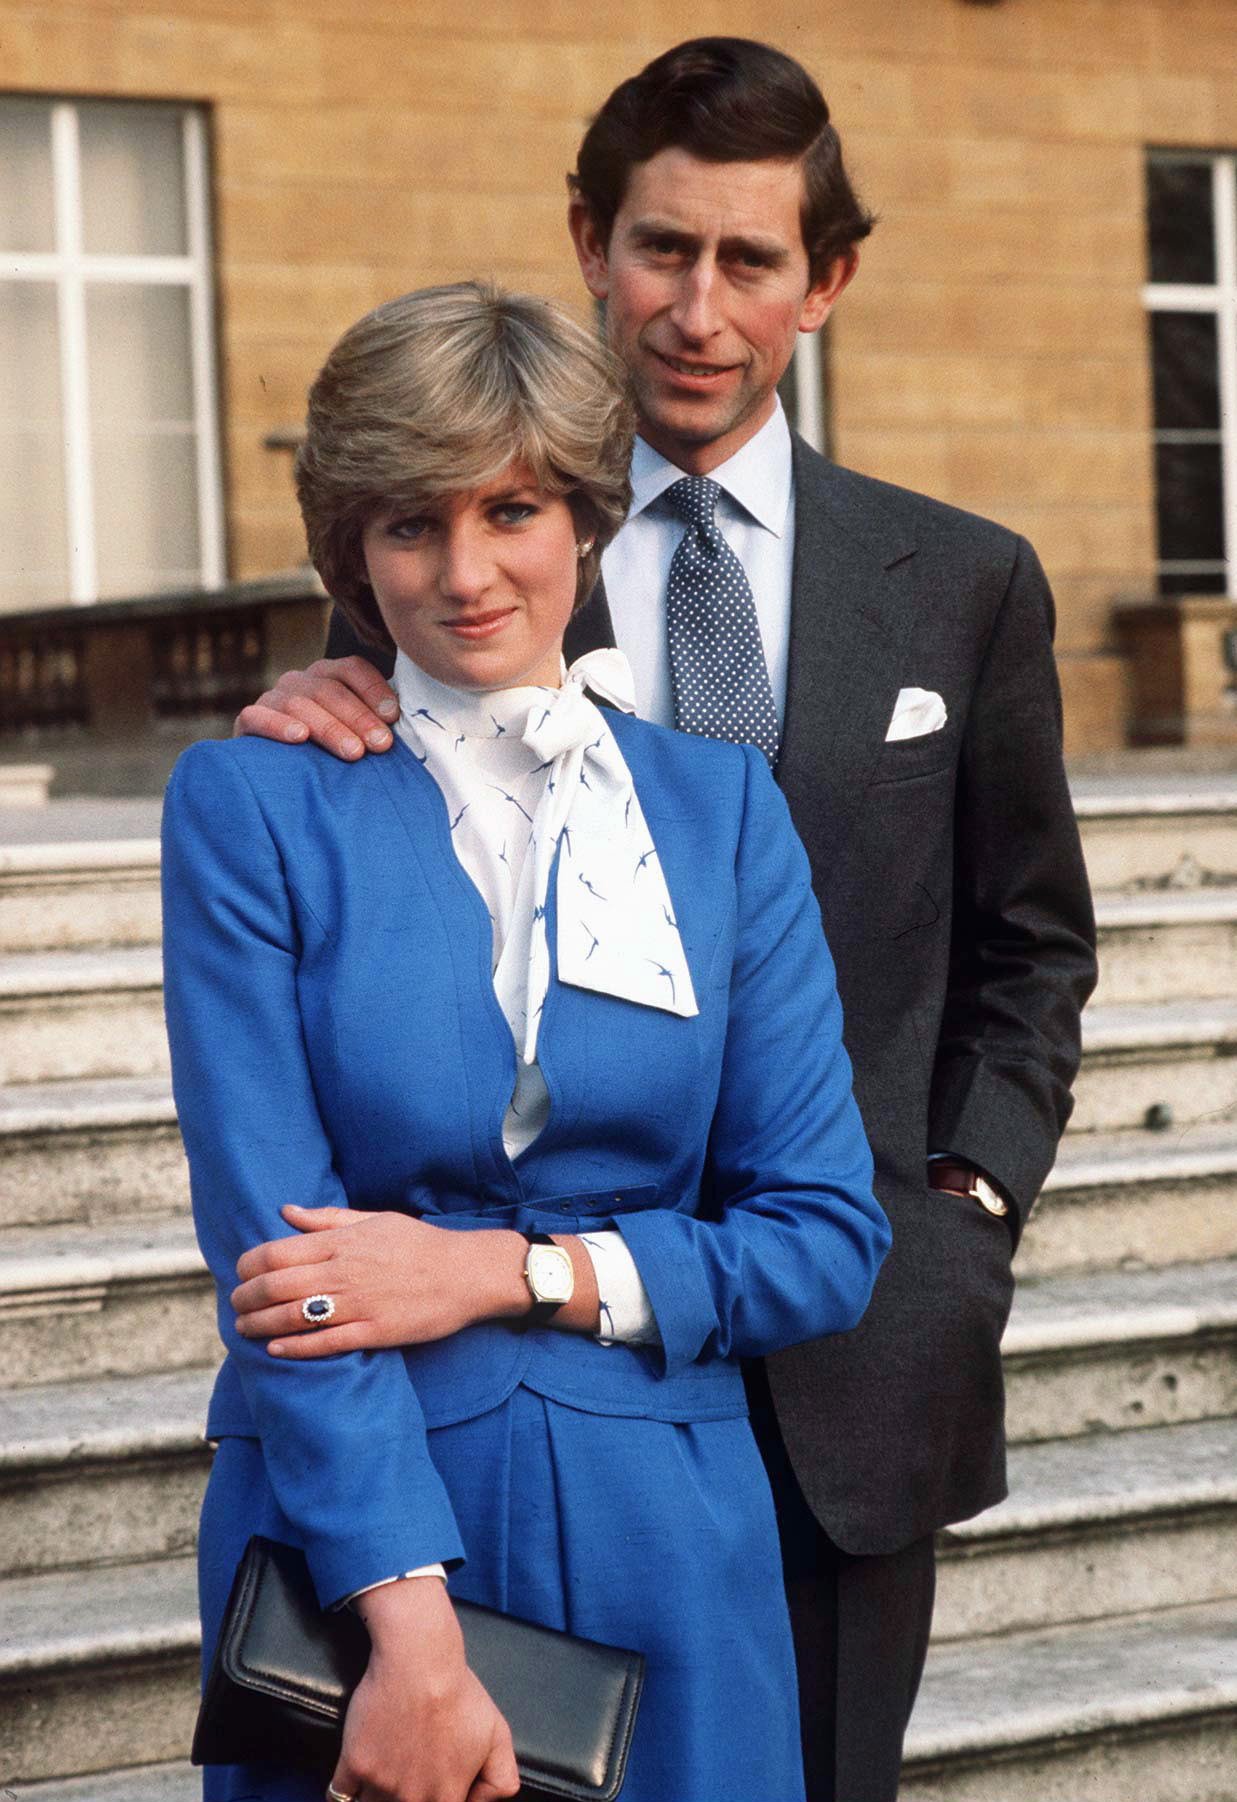 Diana Spencer and Prince Charles pose for photographs in the grounds of Buckingham Palace, in February 1981. | Source: Getty Images